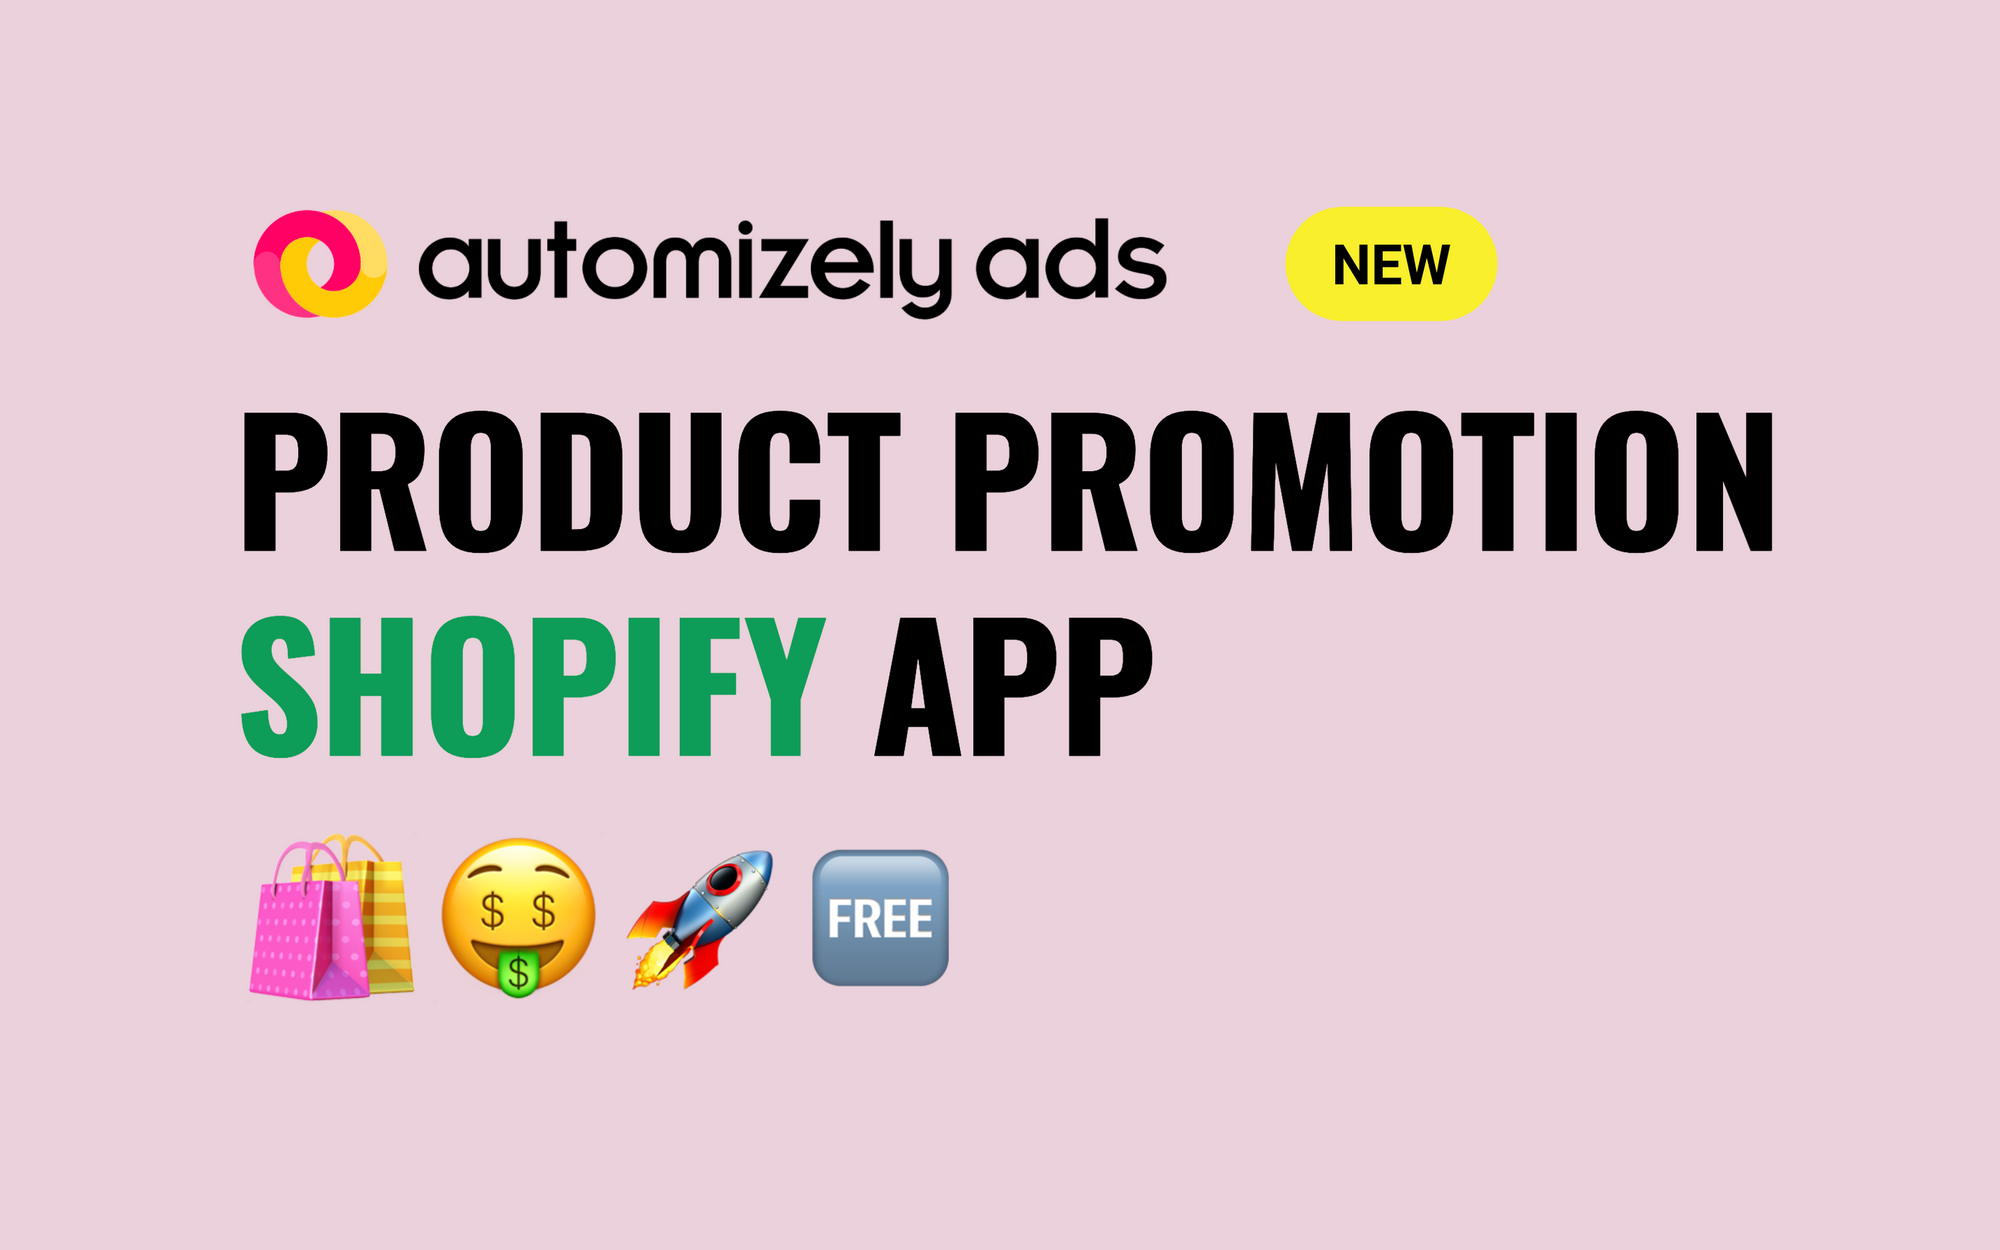 Introducing Automizely Ads app for Shopify stores to get FREE traffic via ads exchange